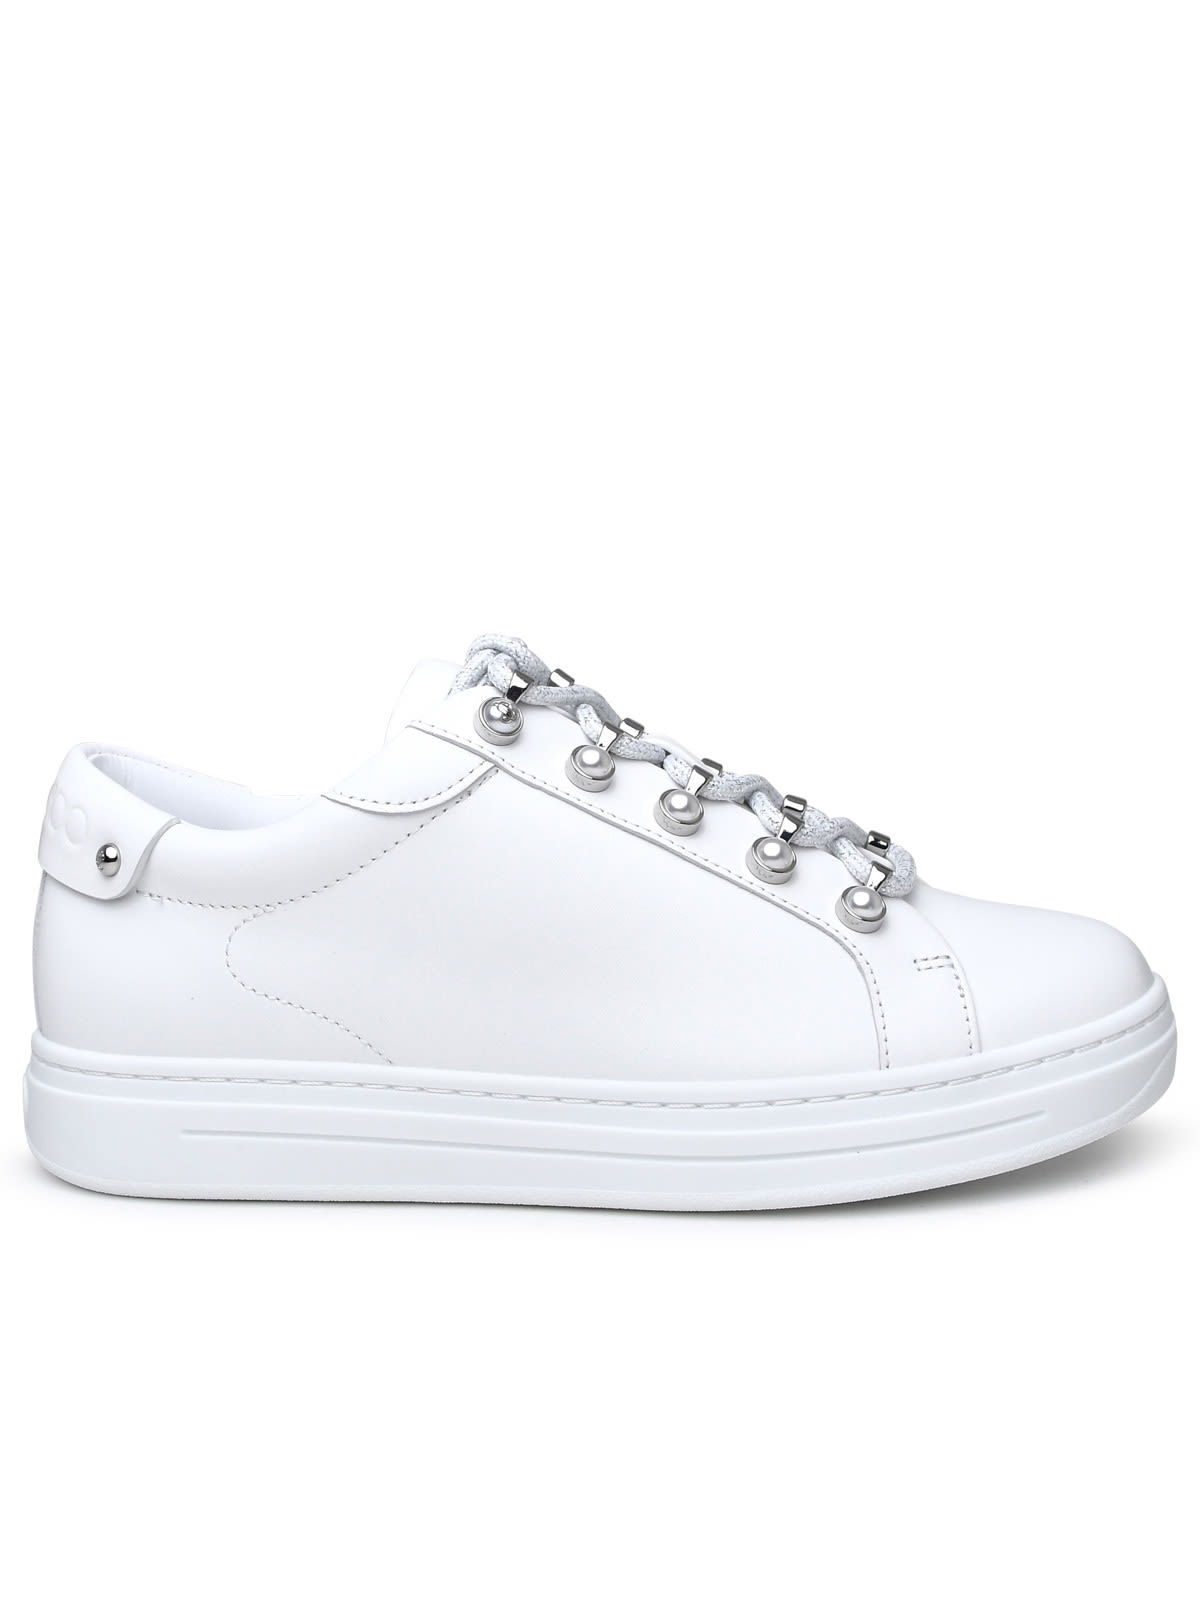 JIMMY CHOO ANTIBES WHITE LEATHER SNEAKERS